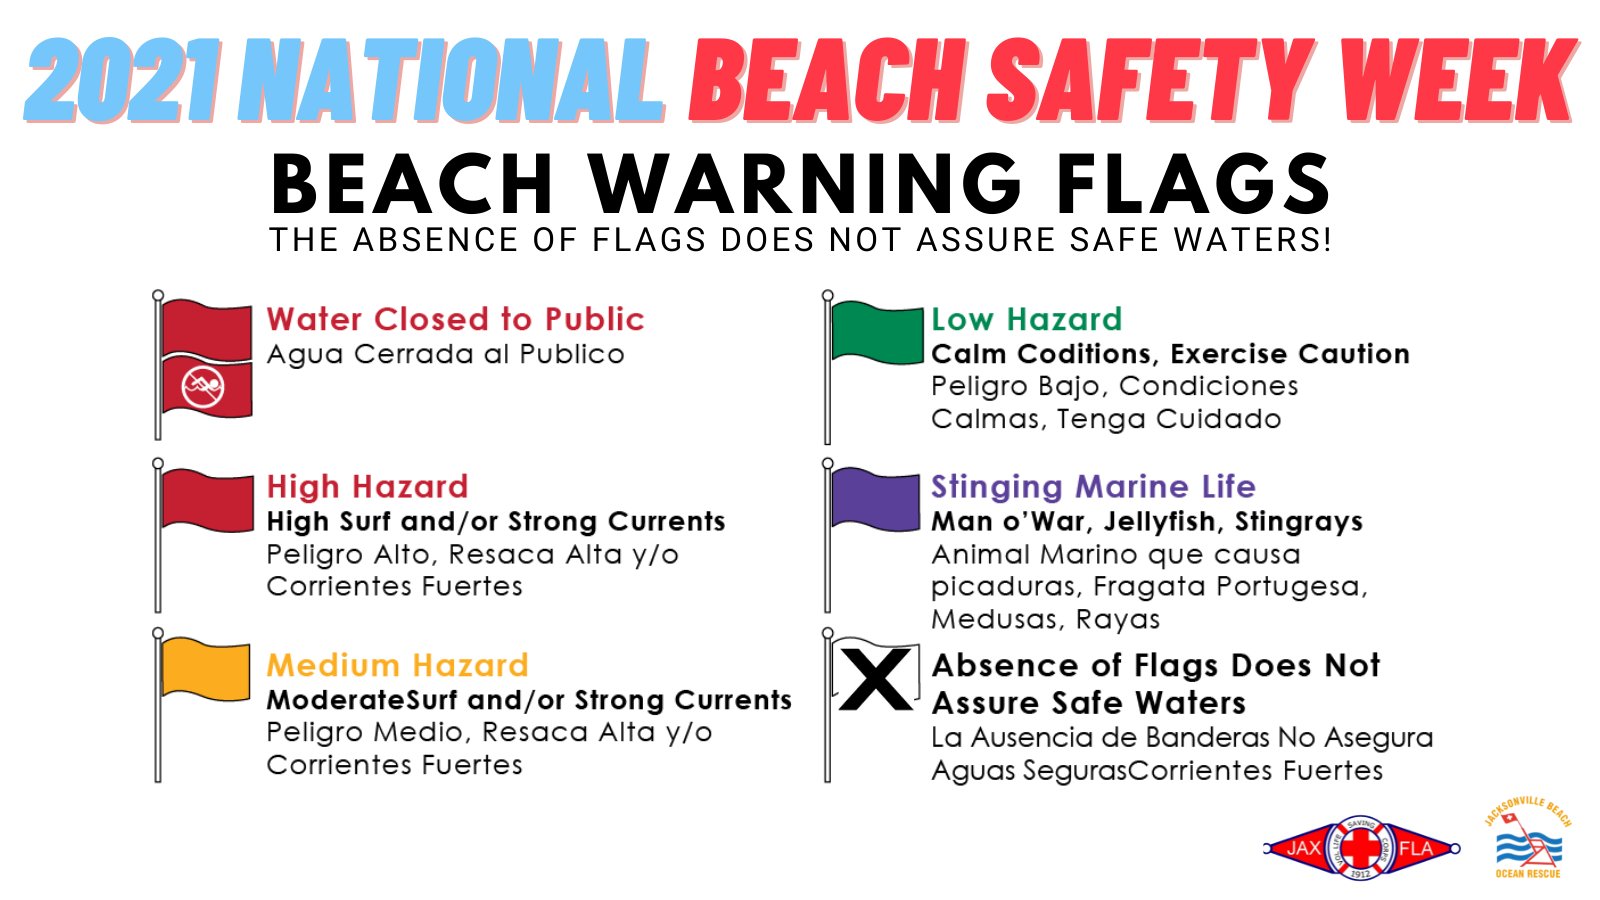 Key to warning flags at the beach